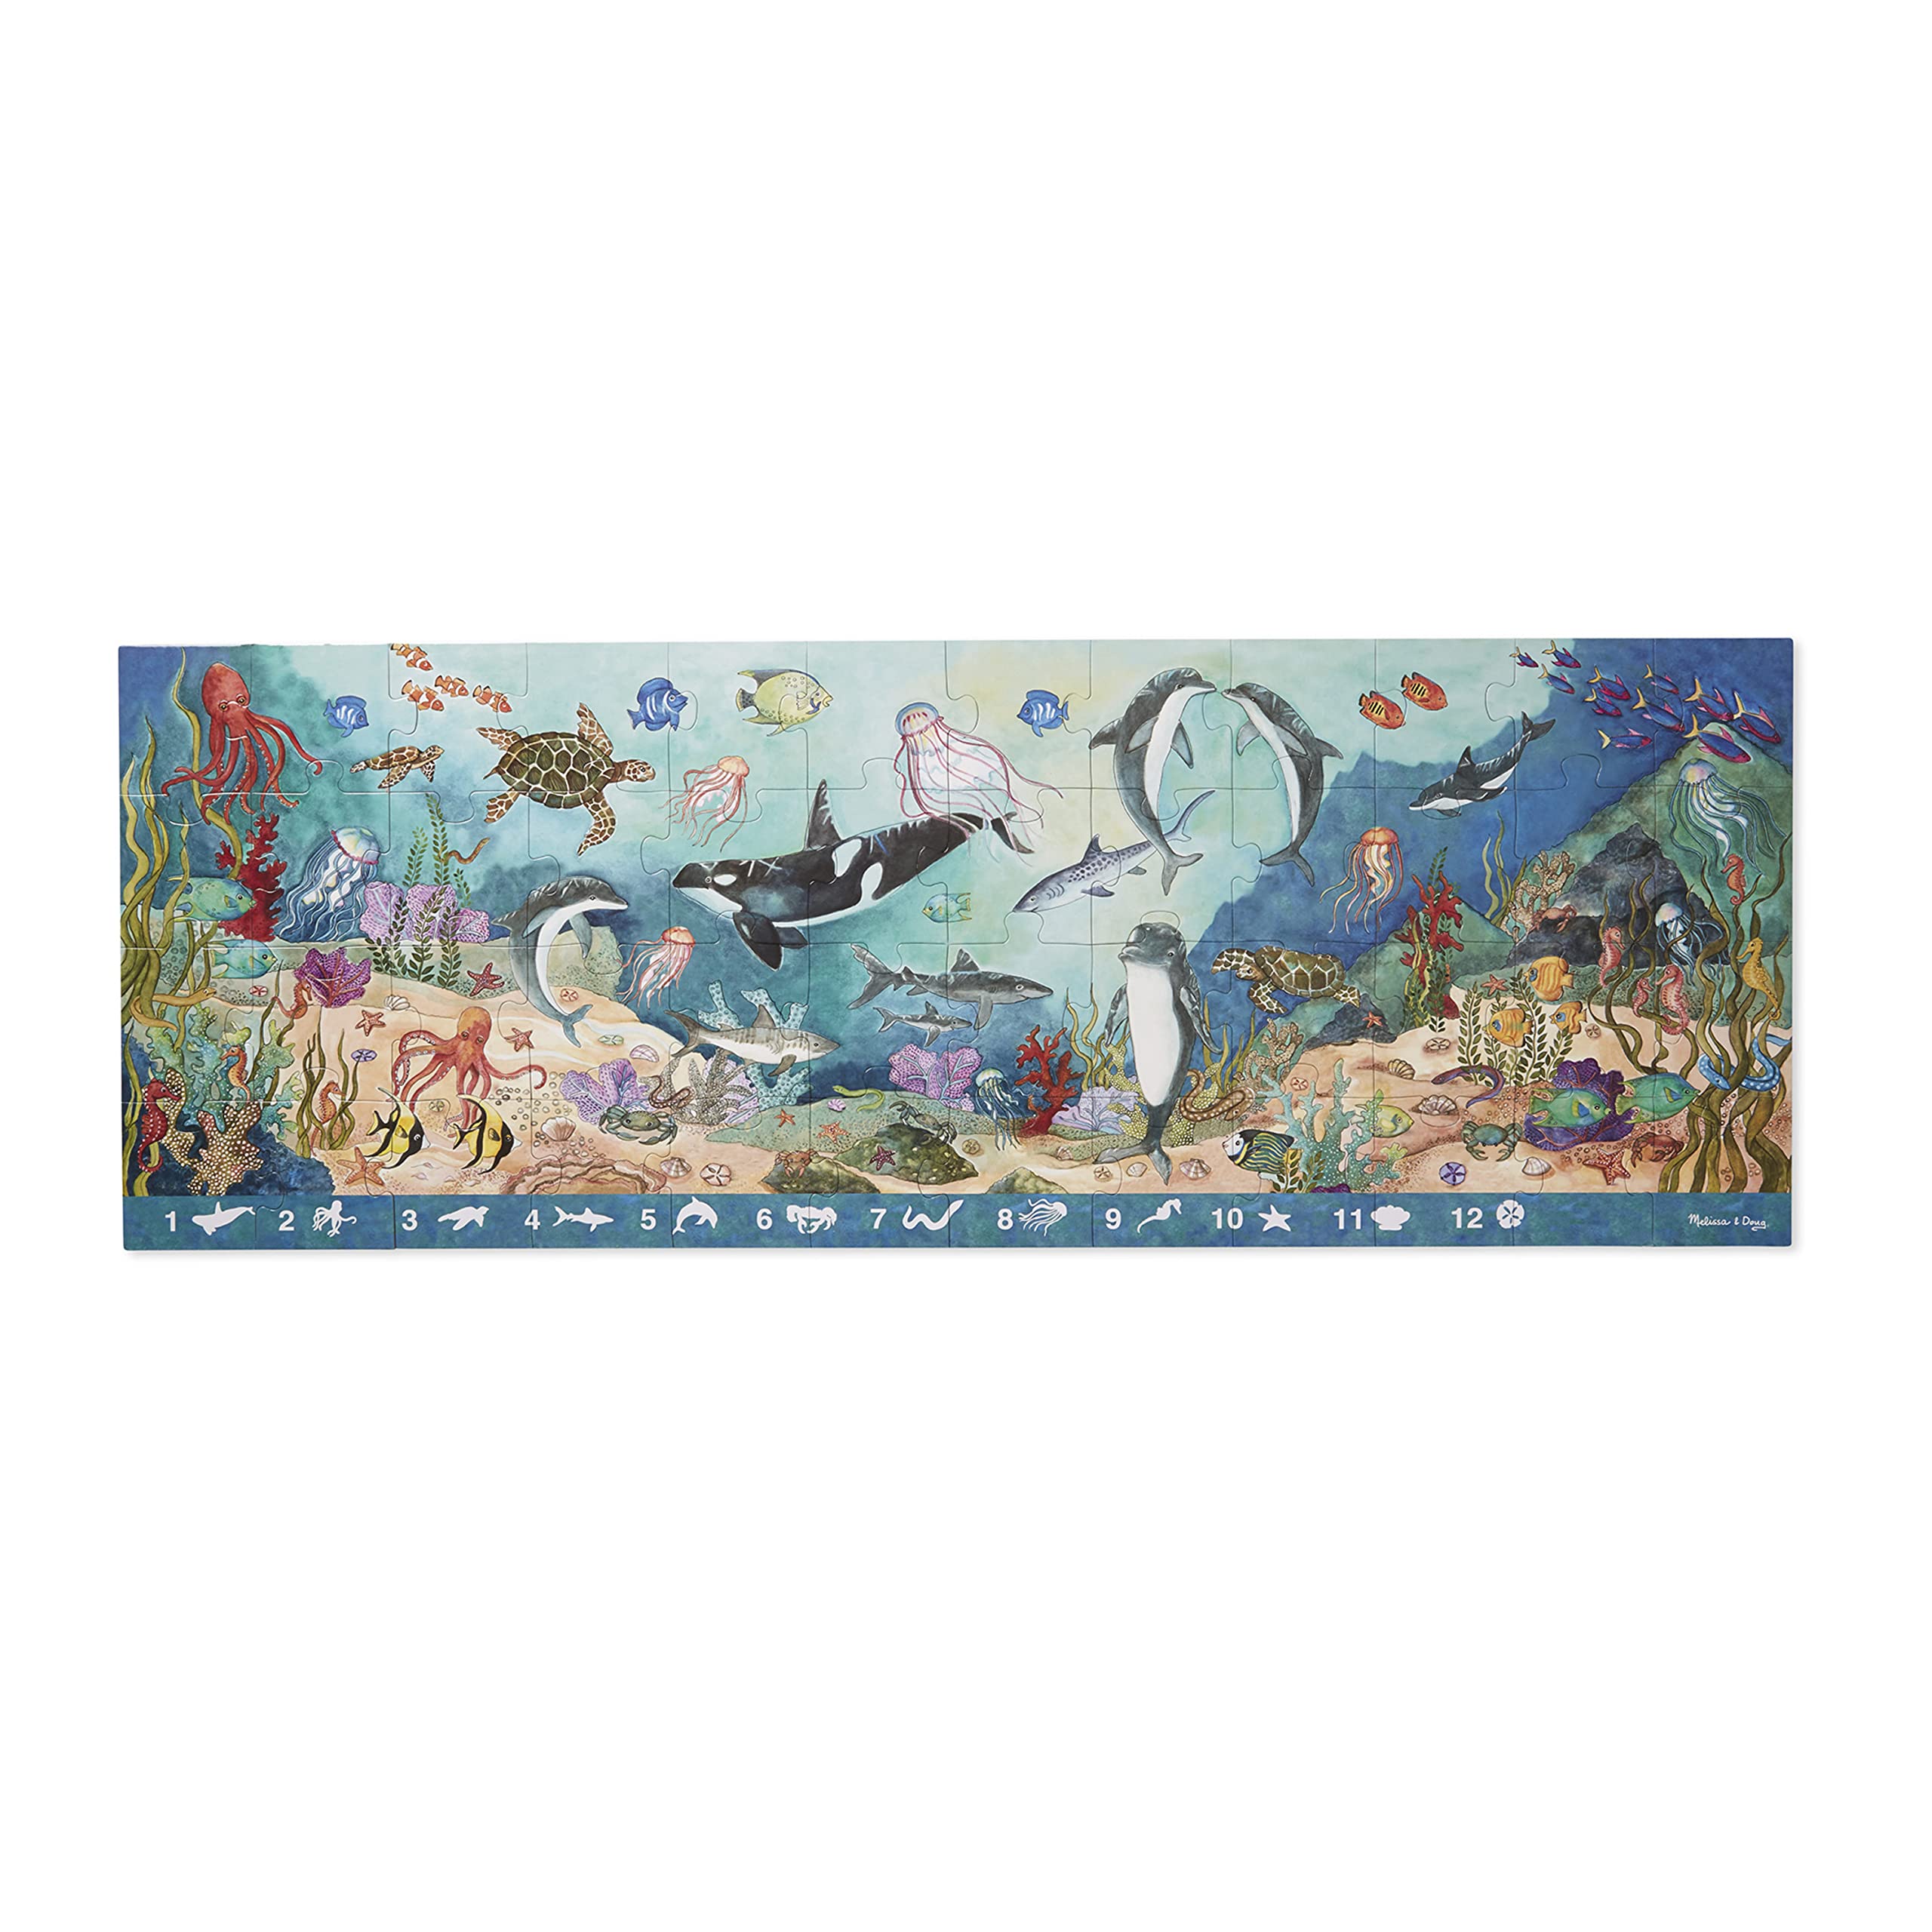 Melissa & Doug Search and Find Beneath the Waves Floor Puzzle (48 pcs, over 4 feet long),Multicolor